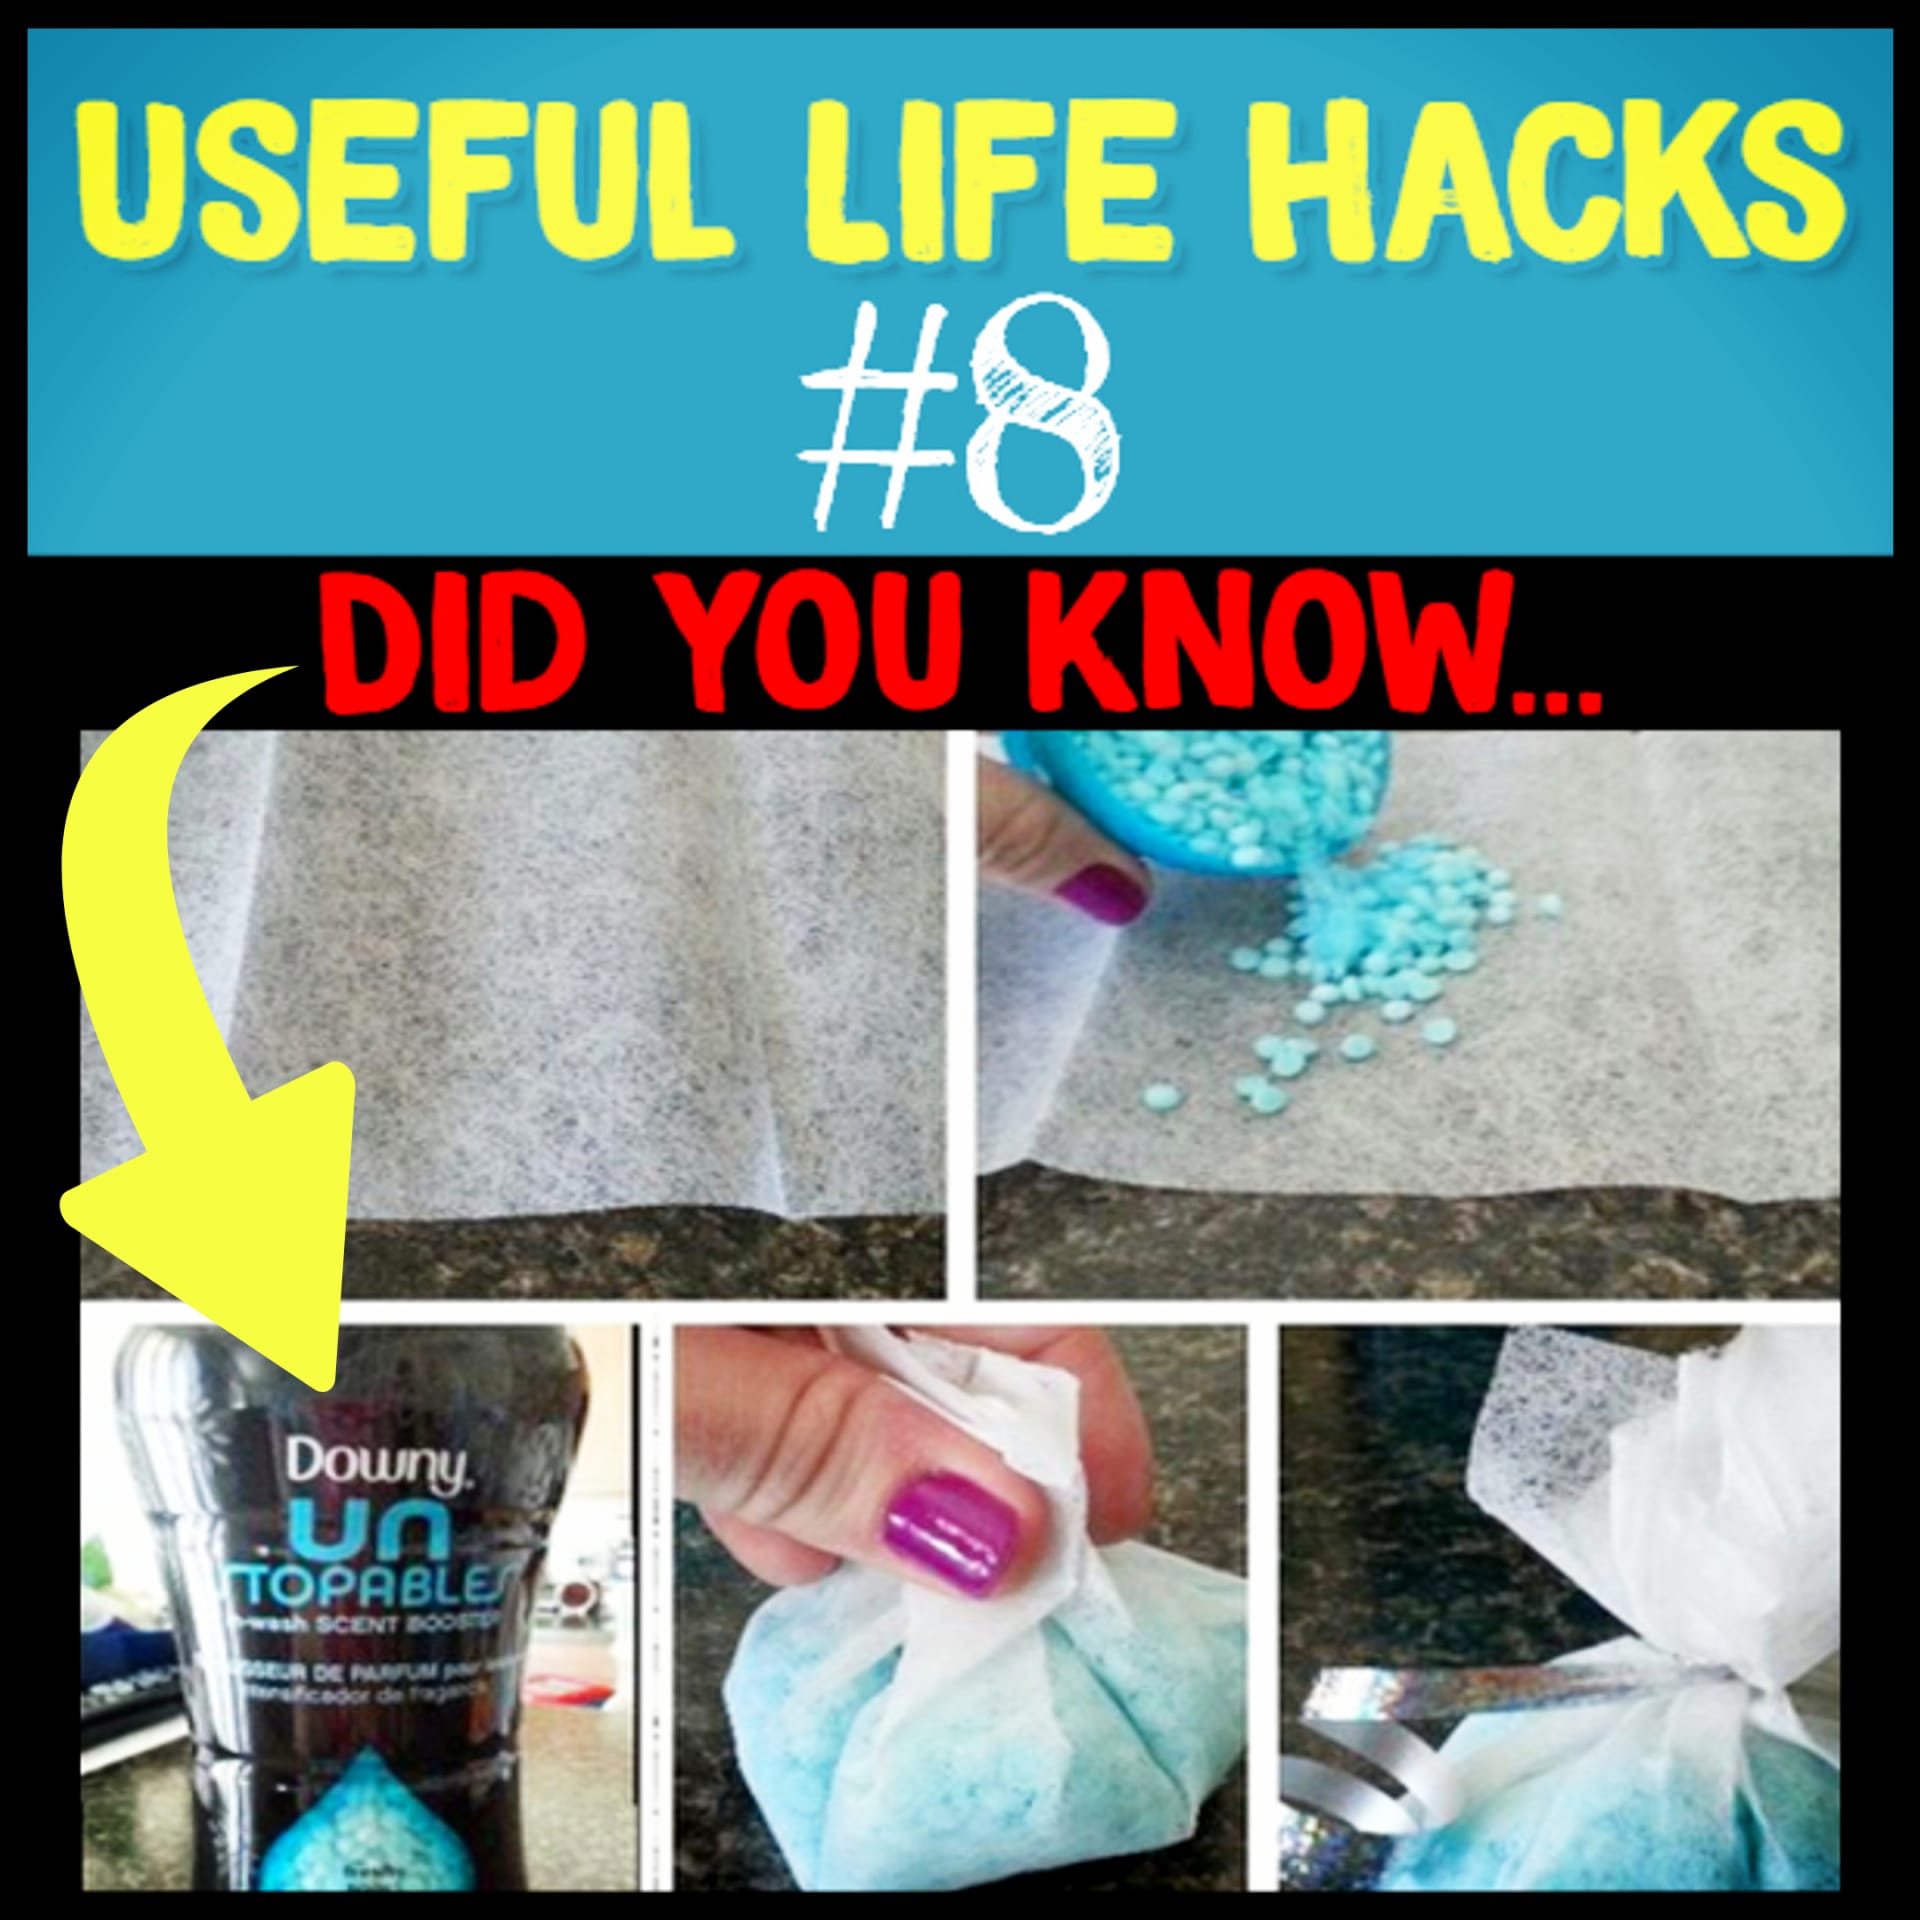 Car Smell HACKS - how to remove car smells and cigarette smoke smells from car - Car Odor Eliminator DIY - how to get rid of car odor and smoke smell - Useful Life Hacks - MIND BLOWN!  Households life hacks and good to know hacks tips and lifehacks - these household hacks, cleaning tips & tricks are such helpful hints and life changing lifehacks with a DIY air freshener 